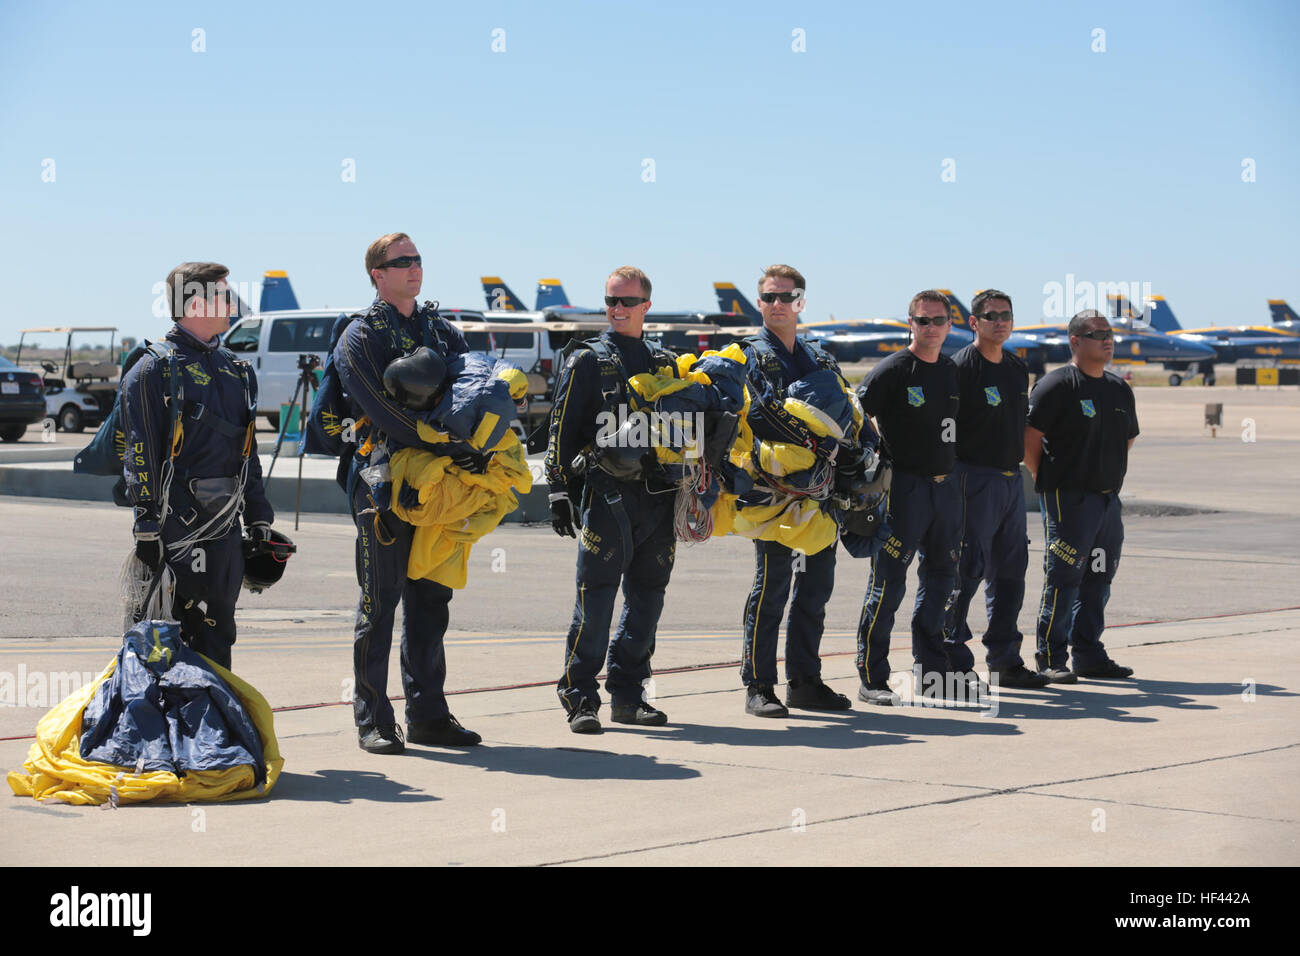 The U.S. Navy Leap Frogs Parachute Team is introduced to a crowd of onlookers during the 2016 Marine Corps Air Station (MCAS) Miramar Air Show at MCAS Miramar, Calif., Sept. 24, 2016. The MCAS Miramar Air Show honors 100 years of the Marine Corps Reserves by showcasing aerial prowess of the Armed Forces and their appreciation of civilian community’s support to the troops. (U.S. Marine Corps photo by Pfc. Nadia J. Stark/Not Released) 2016 MCAS Miramar Air Show 160924-M-BV291-215 Stock Photo